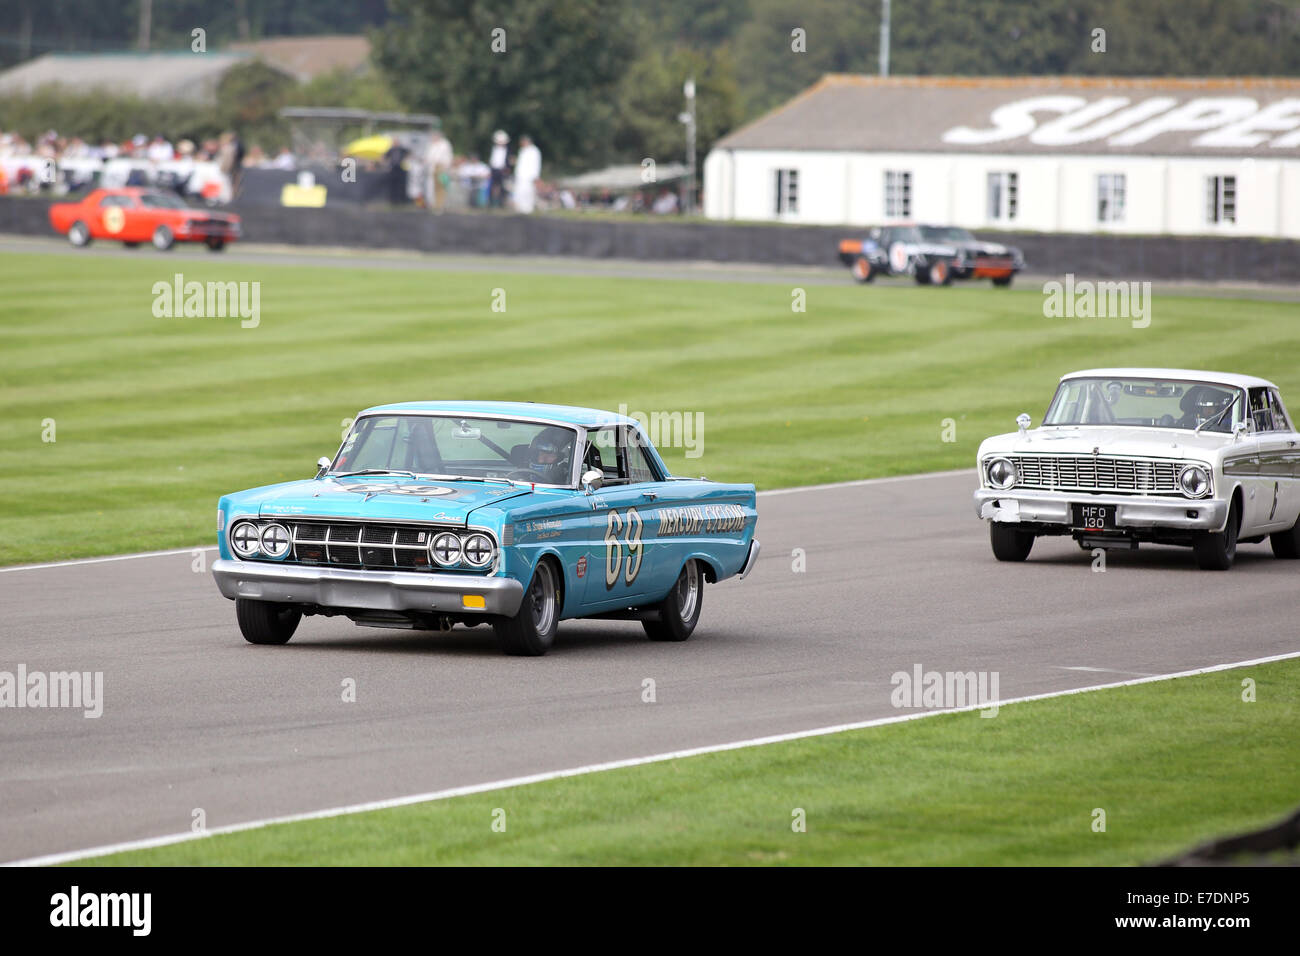 Chichester, West Sussex, UK. 13th Sep, 2014. Pictures from the Goodwood Revival 2014 - The Shelby Cup - A race for saloon cars powered by small-block V8 engines on the 60th anniversary of the small-block V8 engine. A large number of Ford Mustangs mariking the car's 50th anniversary took on other American classics such as Ford Falcon, Plymouth Barracuda, Mercury Comet Cyclone and Dodge Dart. Picture shows: Roger Wills driving a 1964 Mercury Comet Cyclone Credit:  Oliver Dixon/Alamy Live News Stock Photo